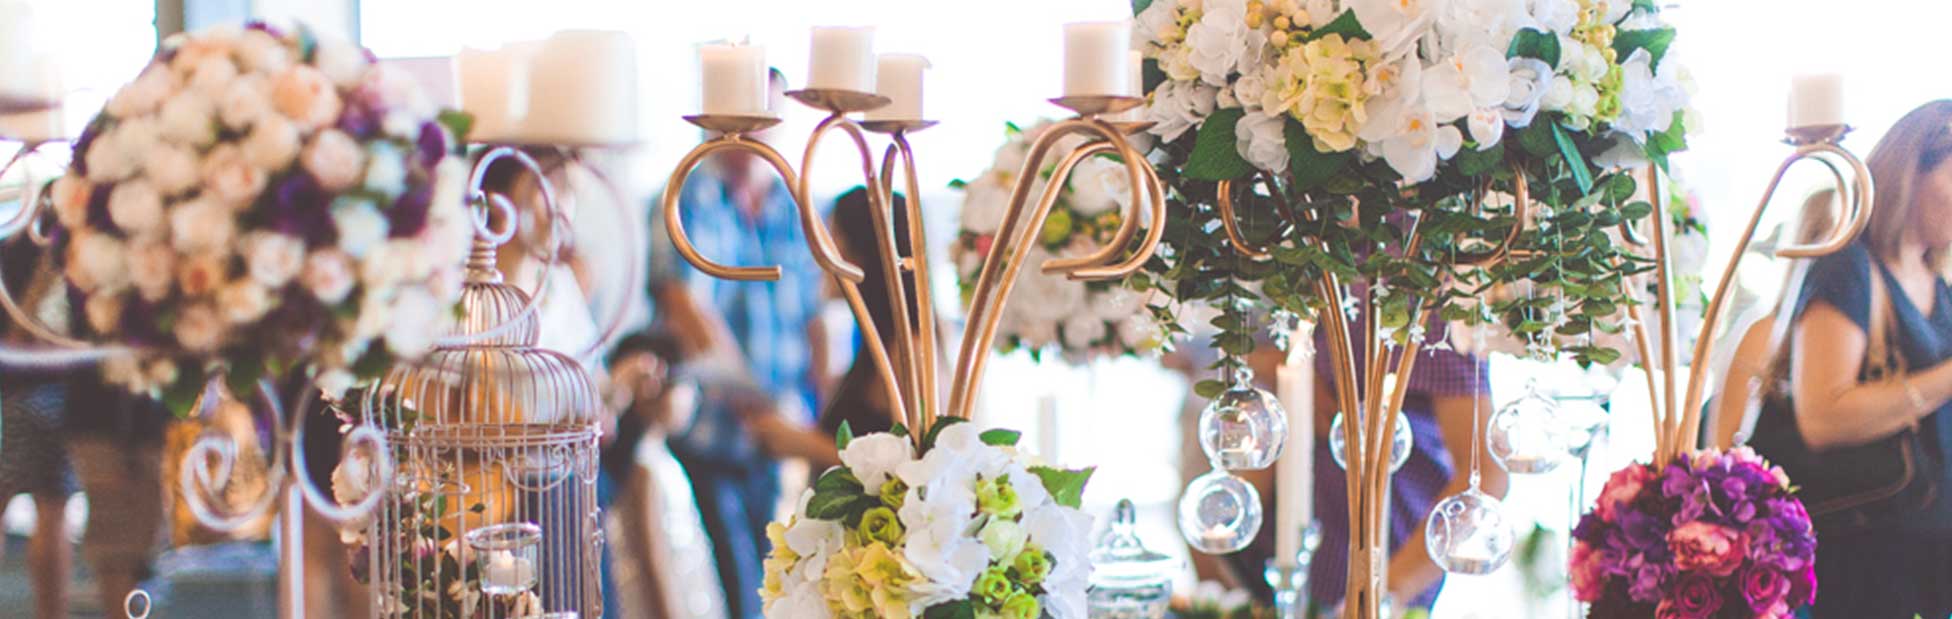 Table filled with wedding decoration examples